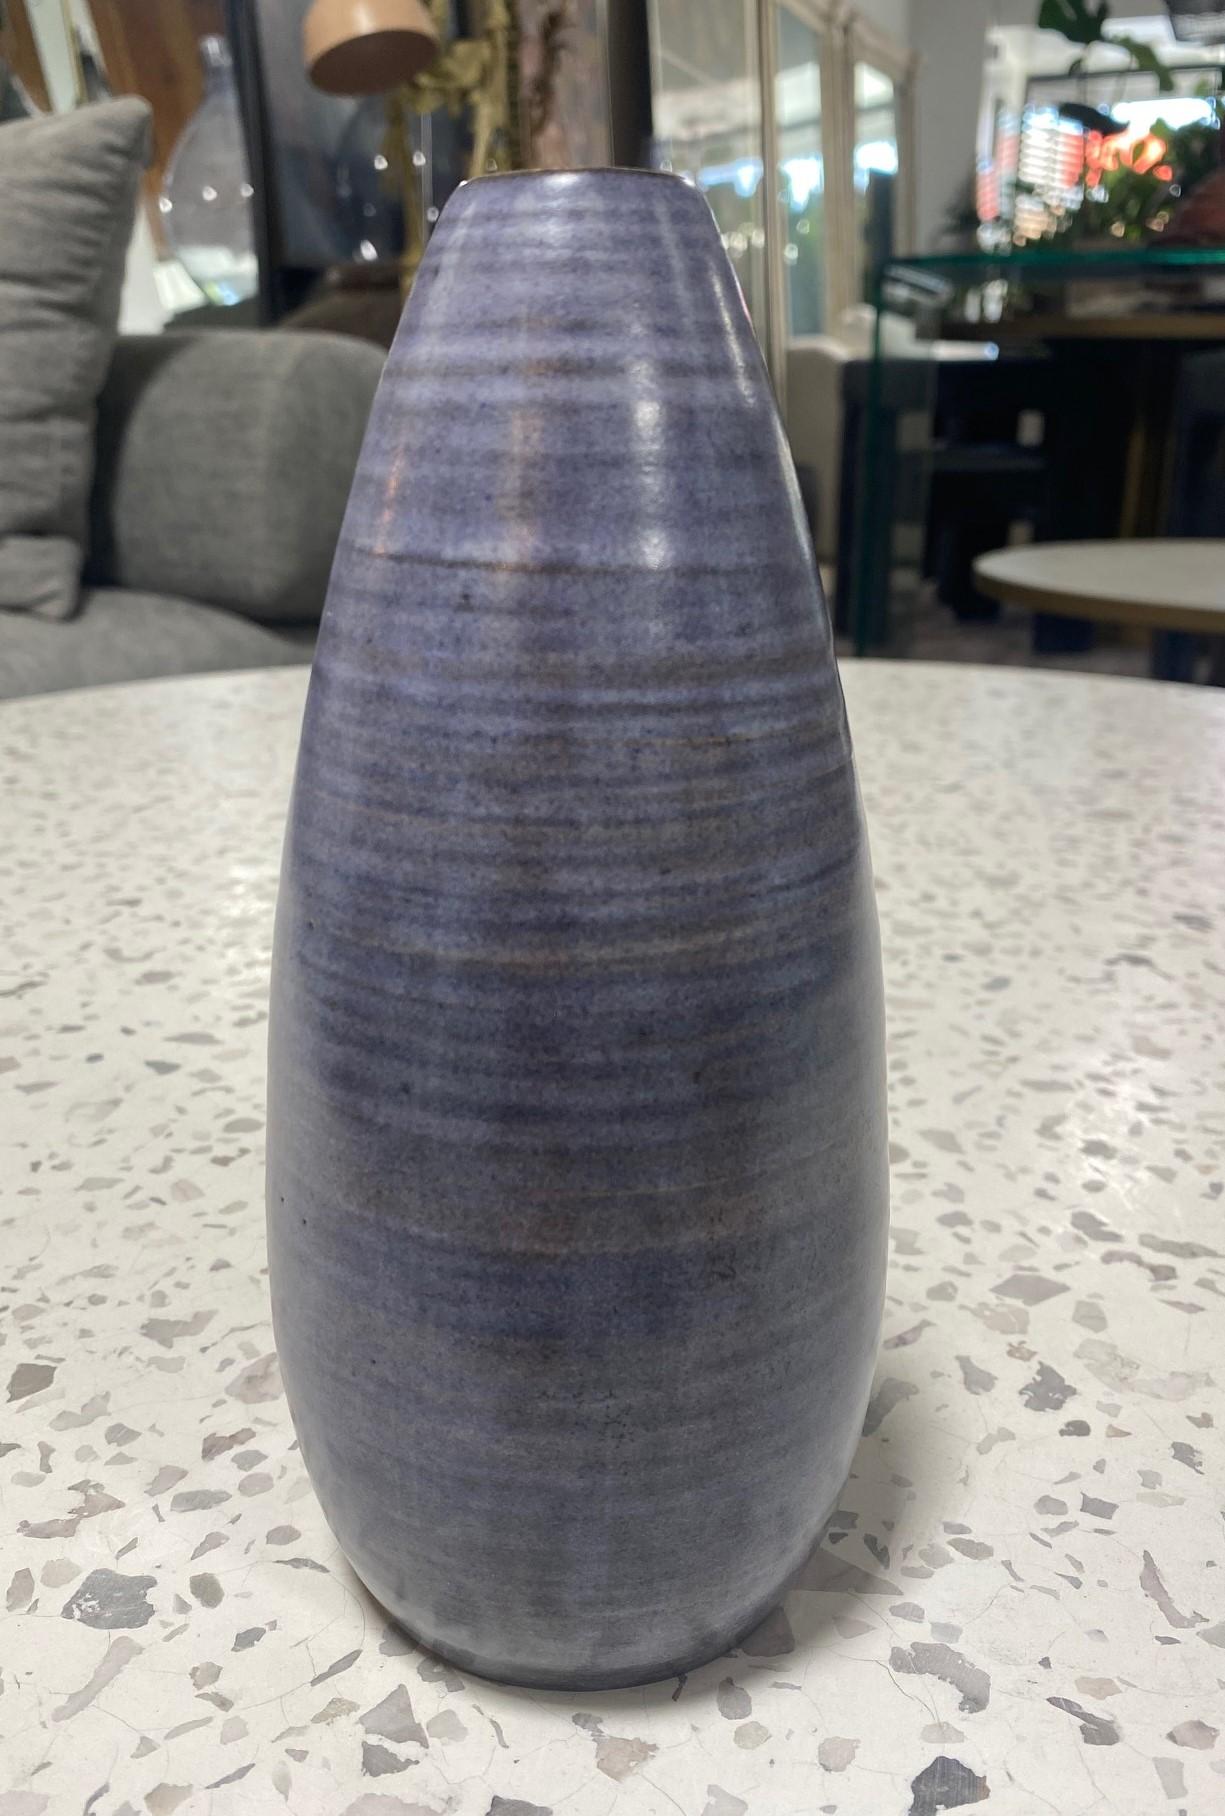 An exquisitely designed and gorgeously glazed vase by renowned American West Coast Californian master ceramist/potter Harrison Mcintosh who was famed for his Mid-Century Modern style of ceramics.  The colors are amazing with shifting highlights of